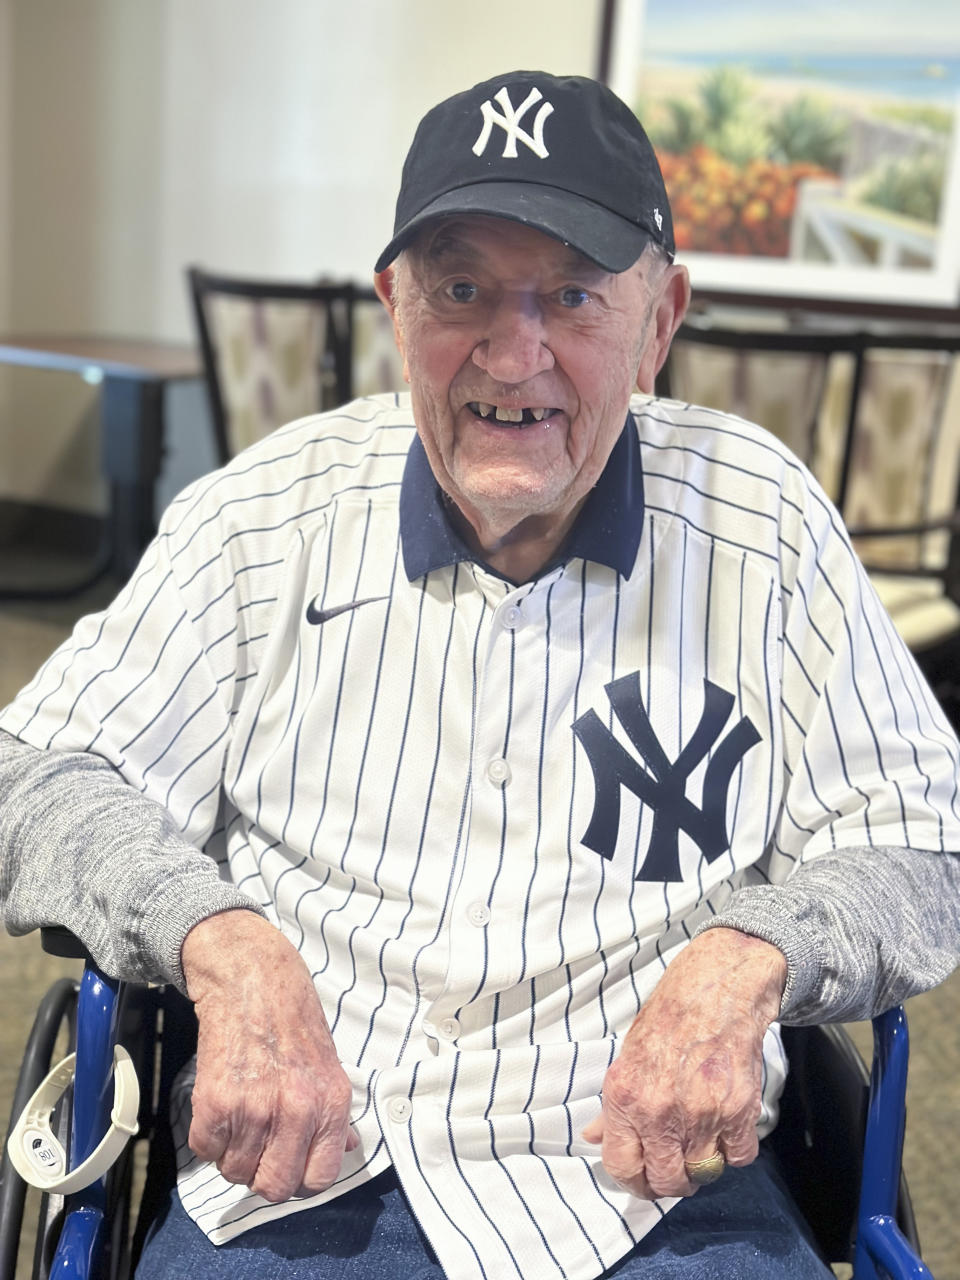 Art Schallock poses for a photo in Sonoma, Calif., on Thursday, April 18, 2024. Schallock, the oldest living former Major League Baseball player, will celebrate his 100th birthday on Thursday, April 25, 2024. (Wendy Cornejo, Cogir on Napa Road via AP)